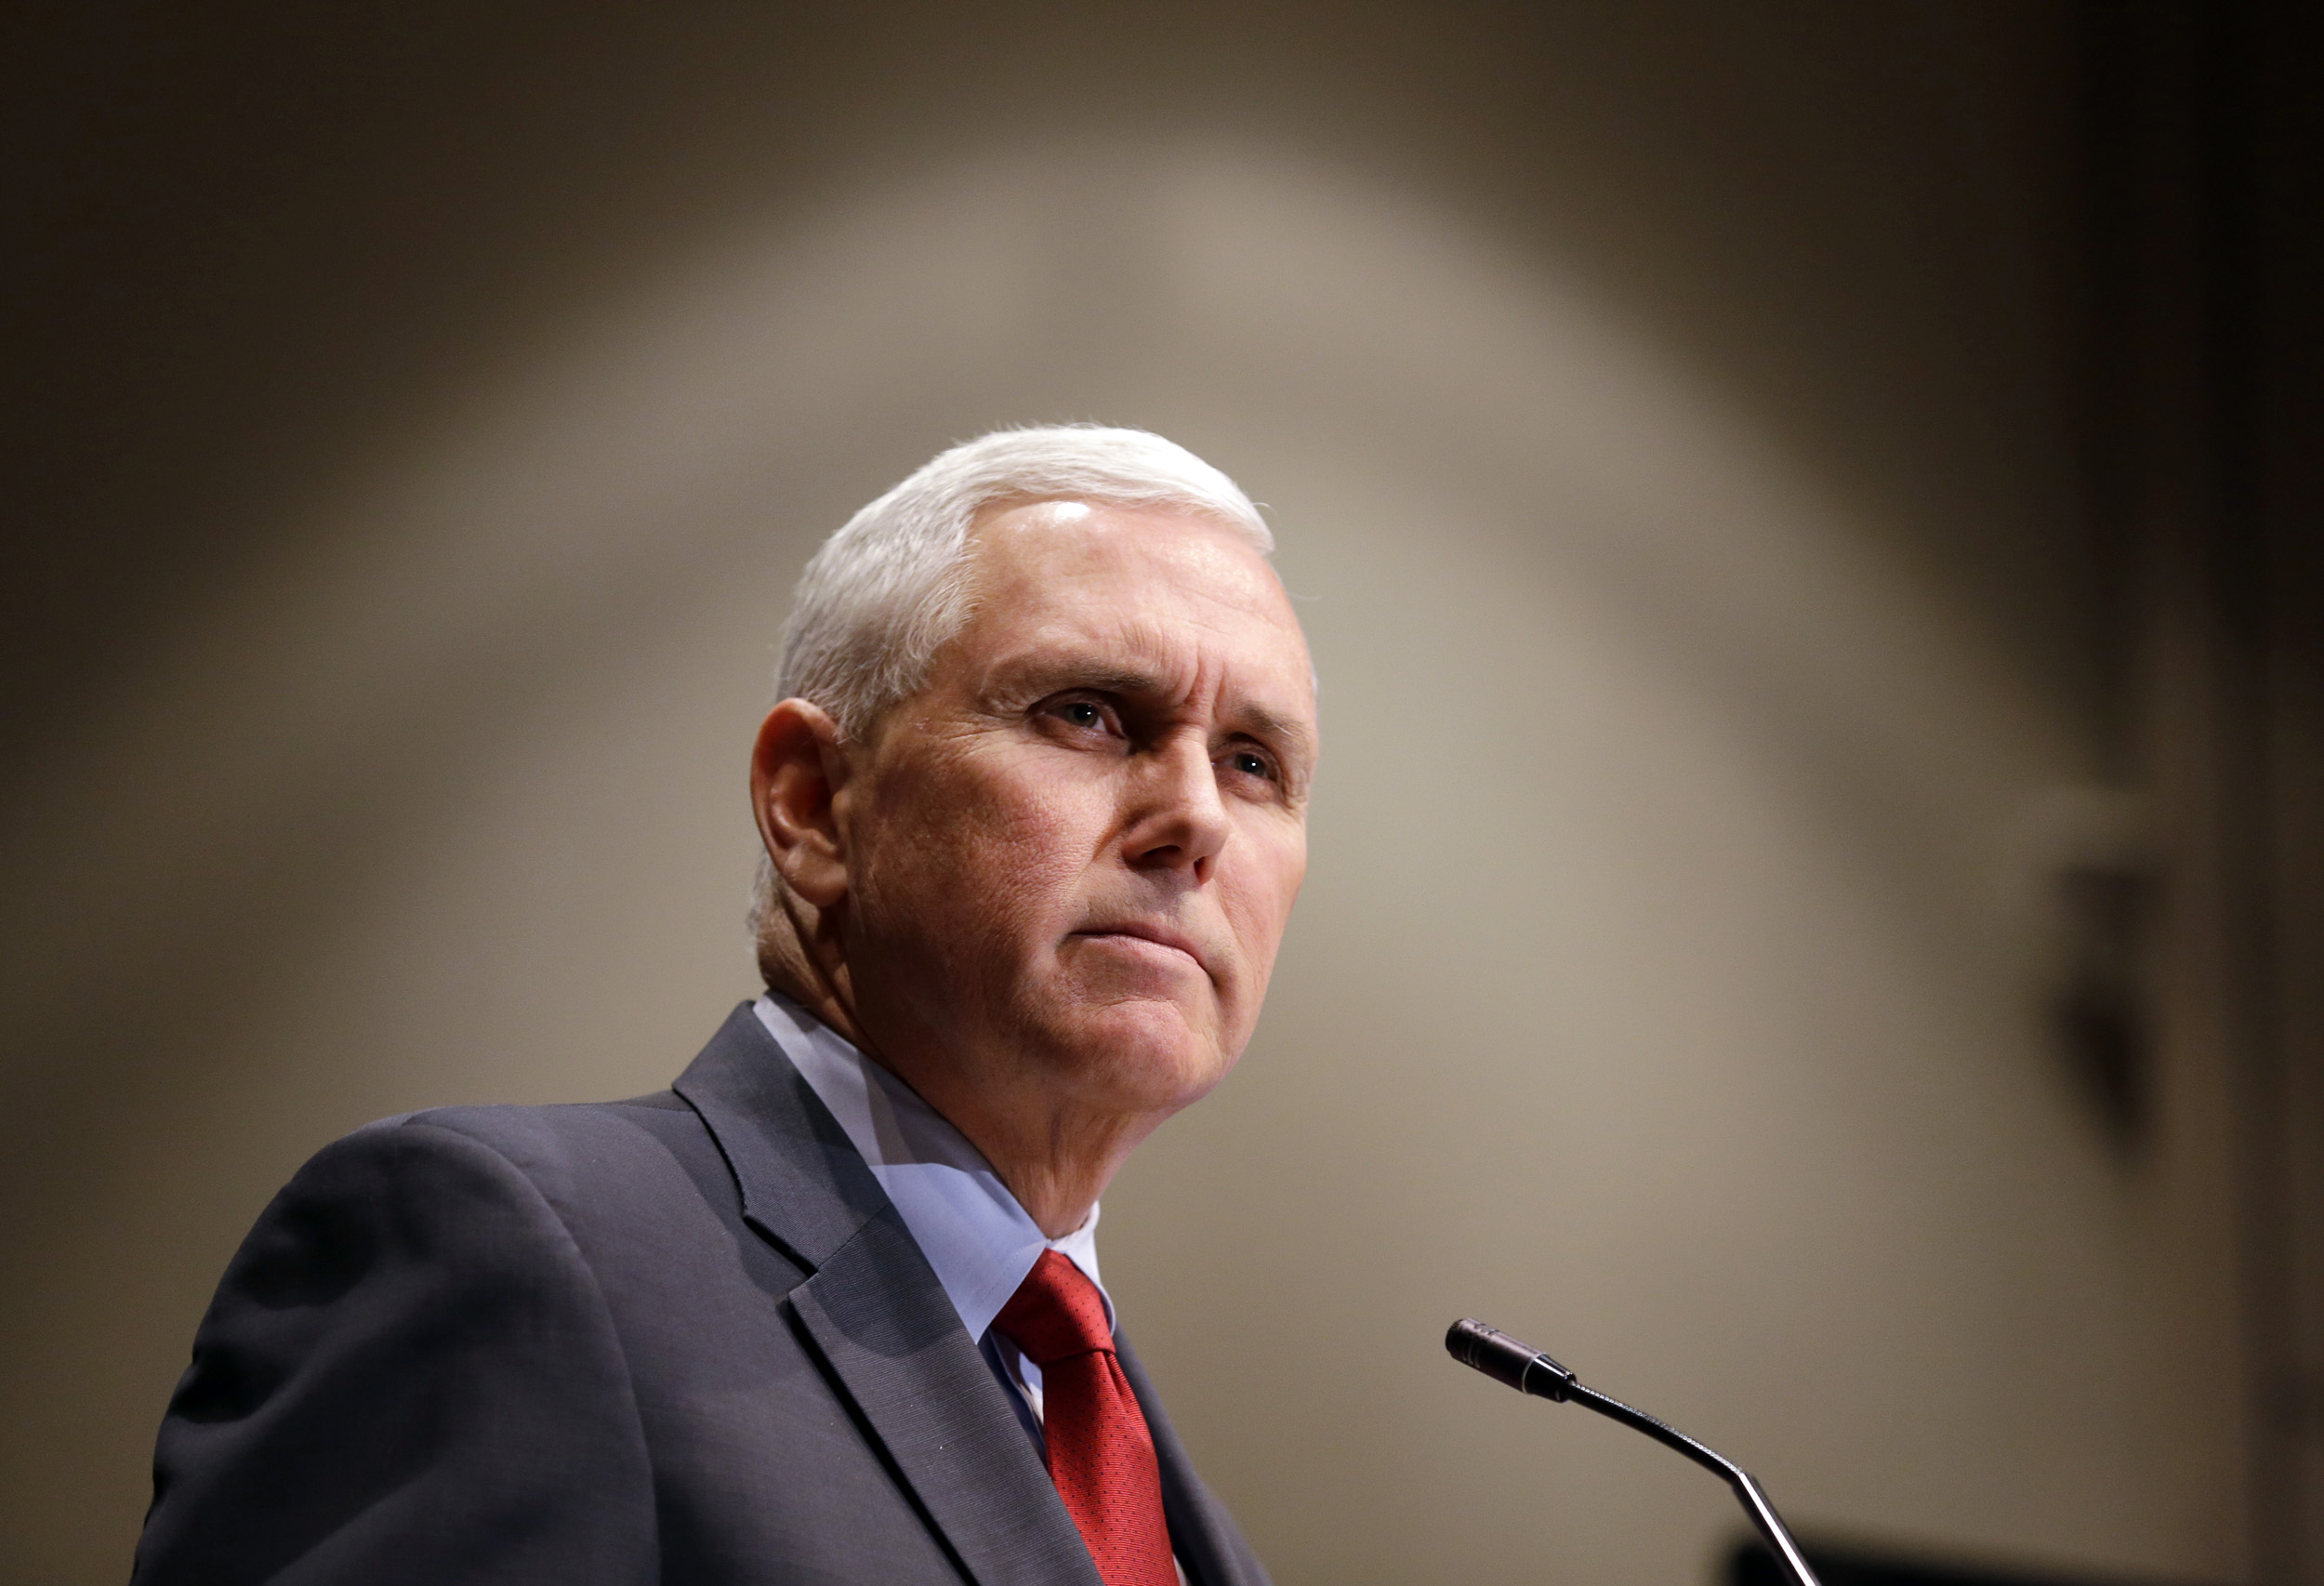 Indiana Gov. Mike Pence gives a speech in Indianapolis on Jan. 27, 2015. (Michael Conroy—AP)